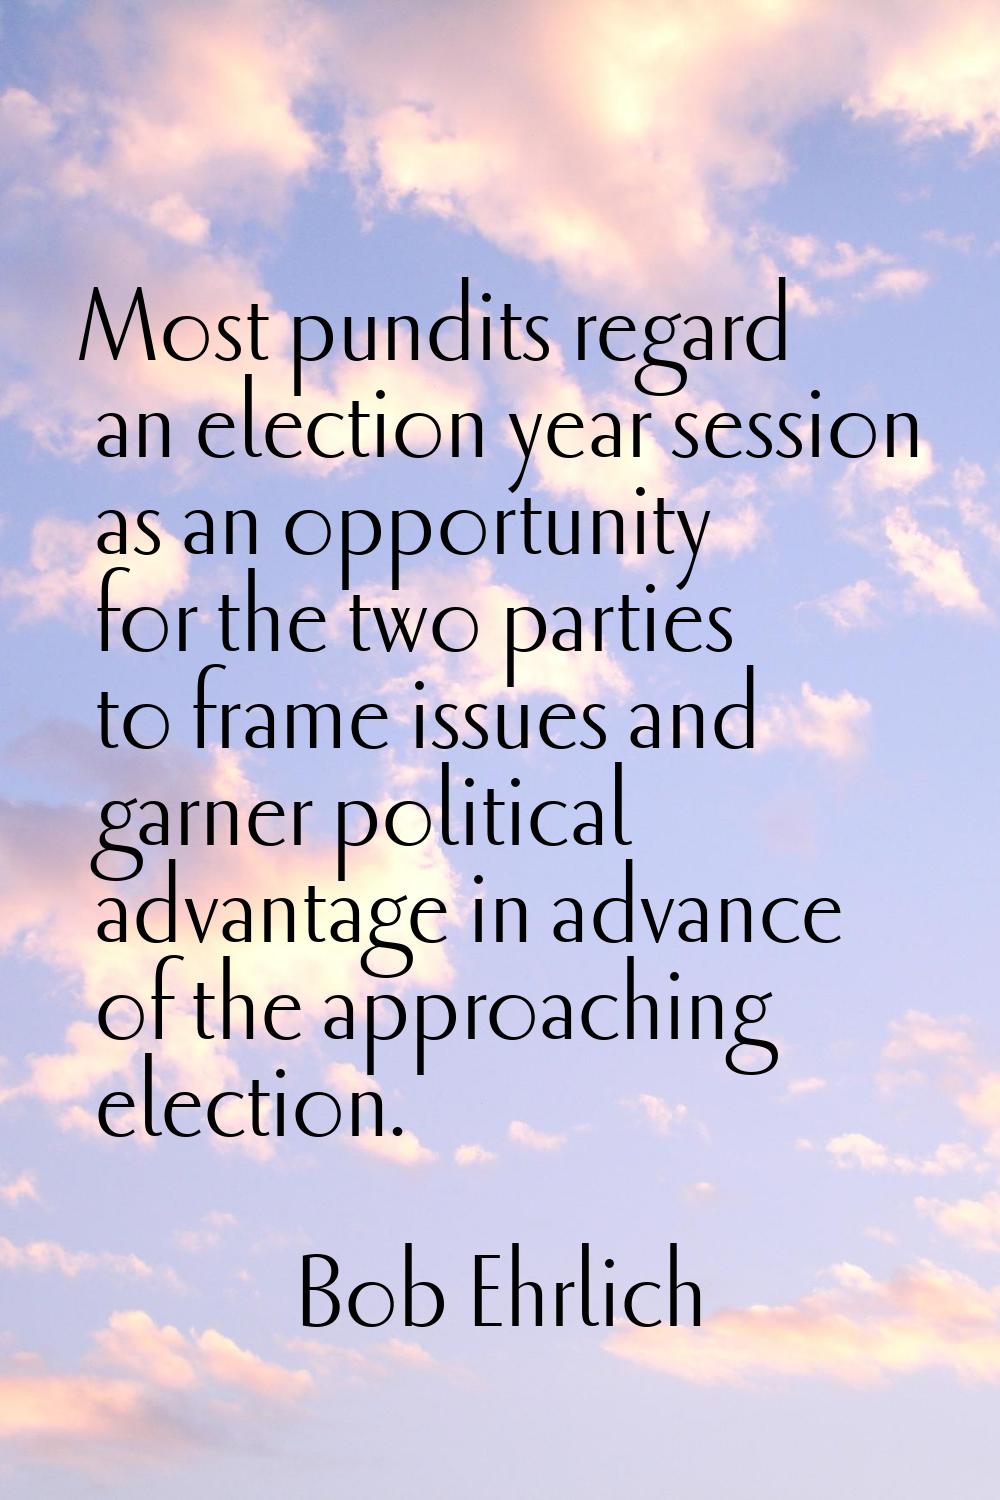 Most pundits regard an election year session as an opportunity for the two parties to frame issues 